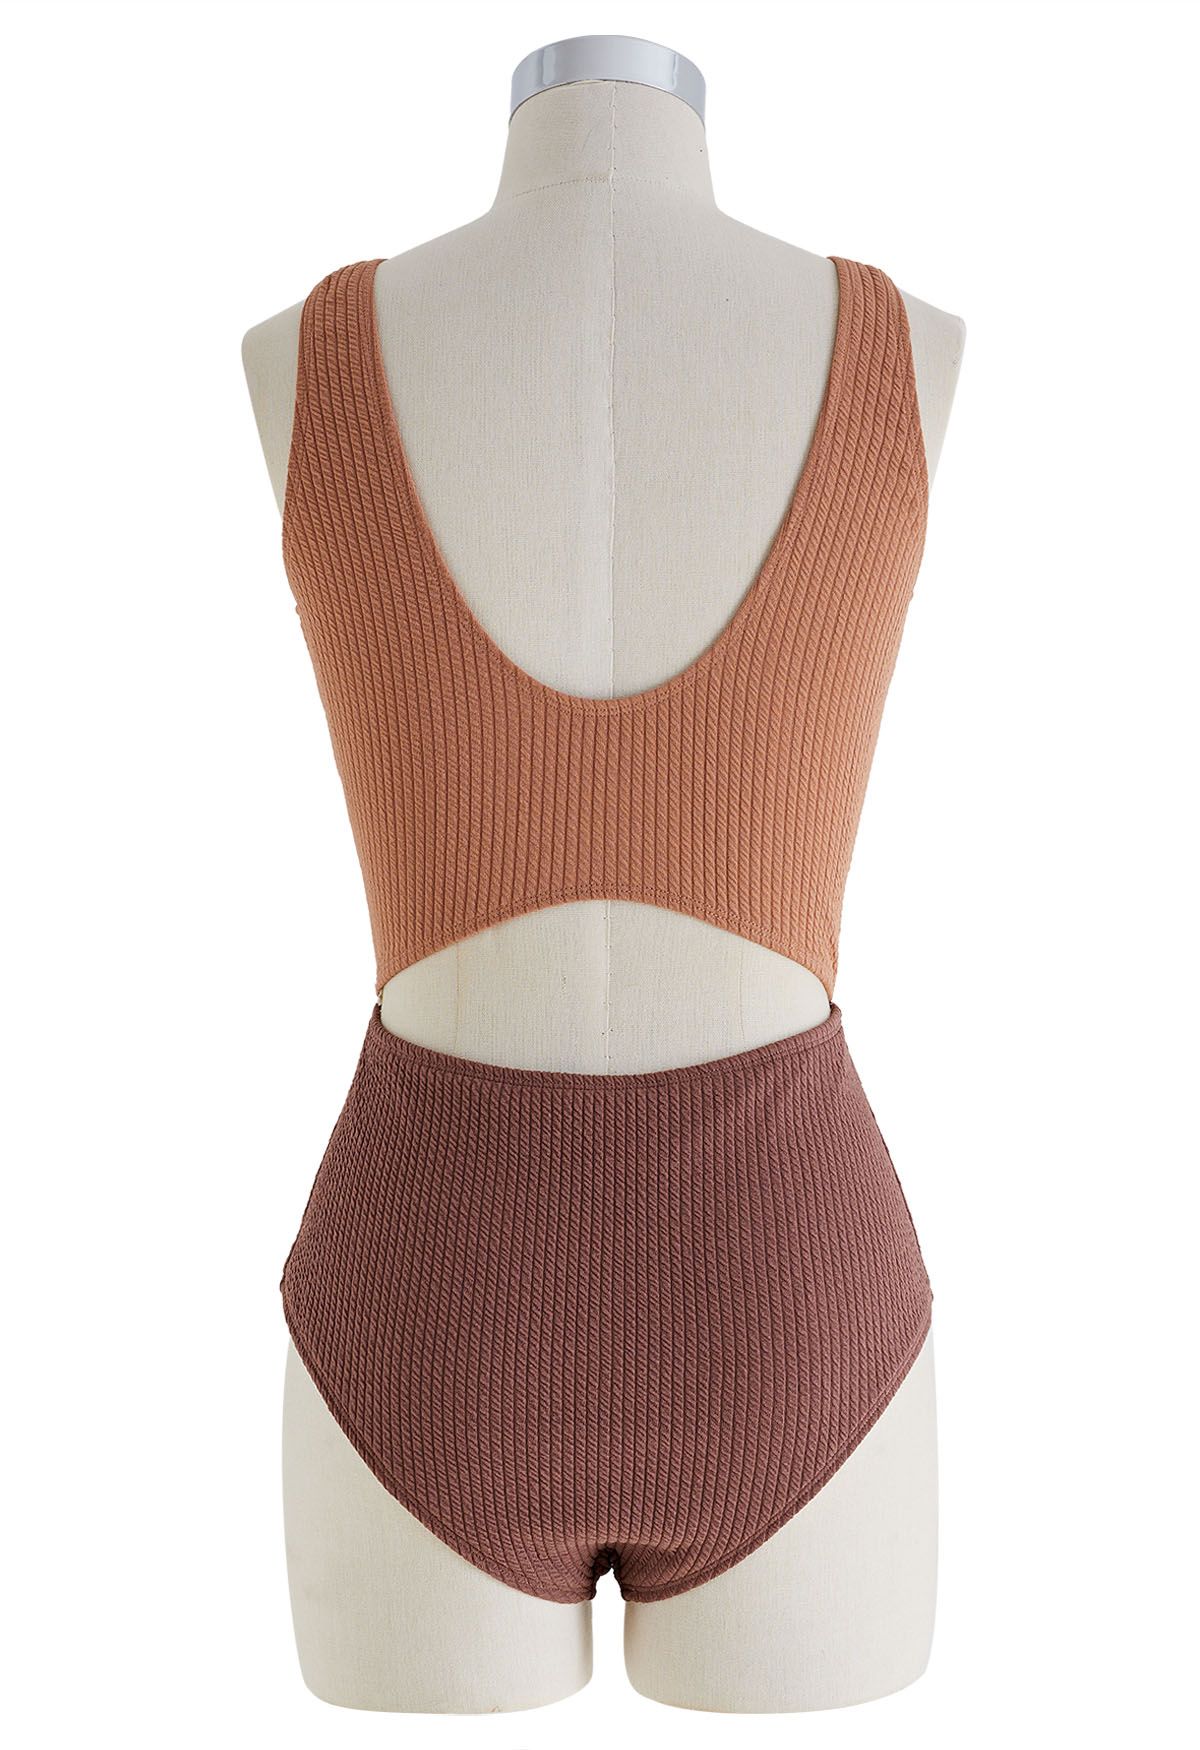 Two-Tone Cutout Embossed Swimsuit